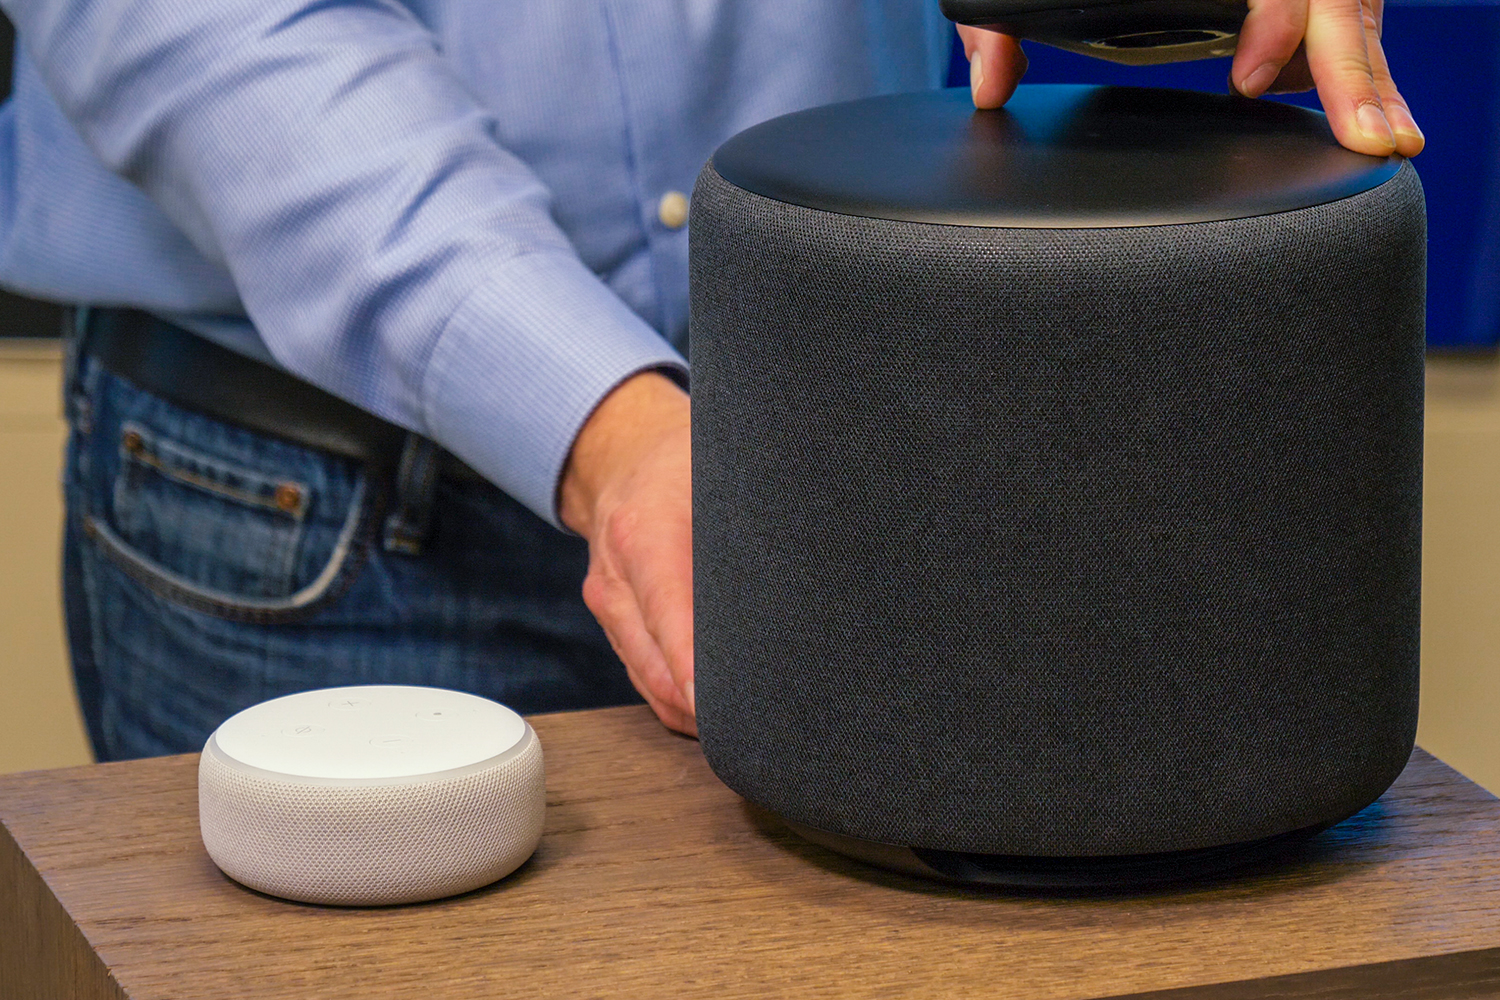 Echo Sub: a $129.99 subwoofer that pairs with Echo speakers